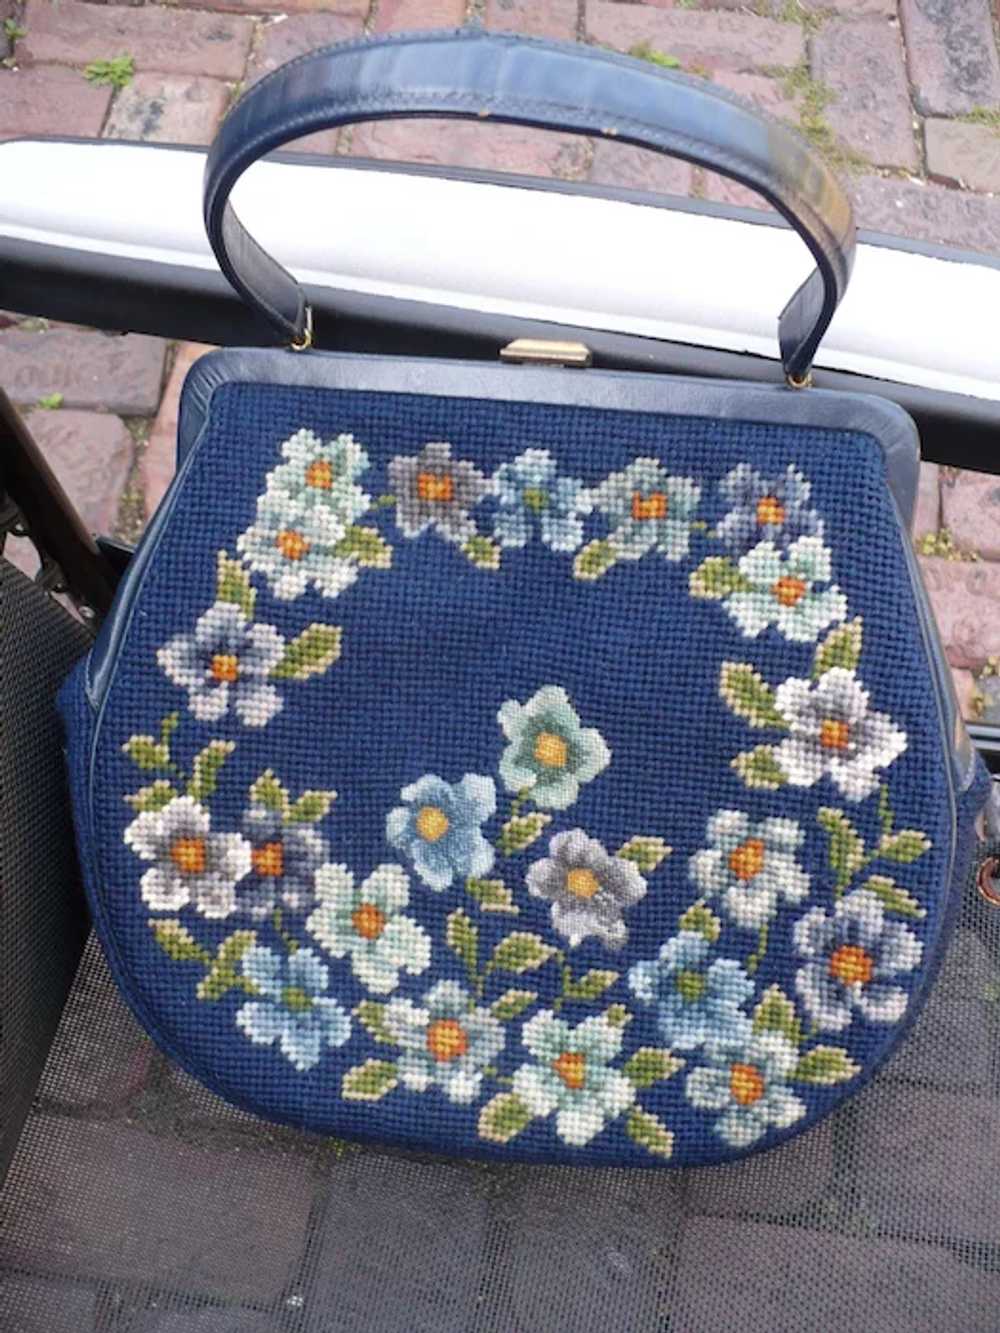 Floral Needlepoint Purse - image 2